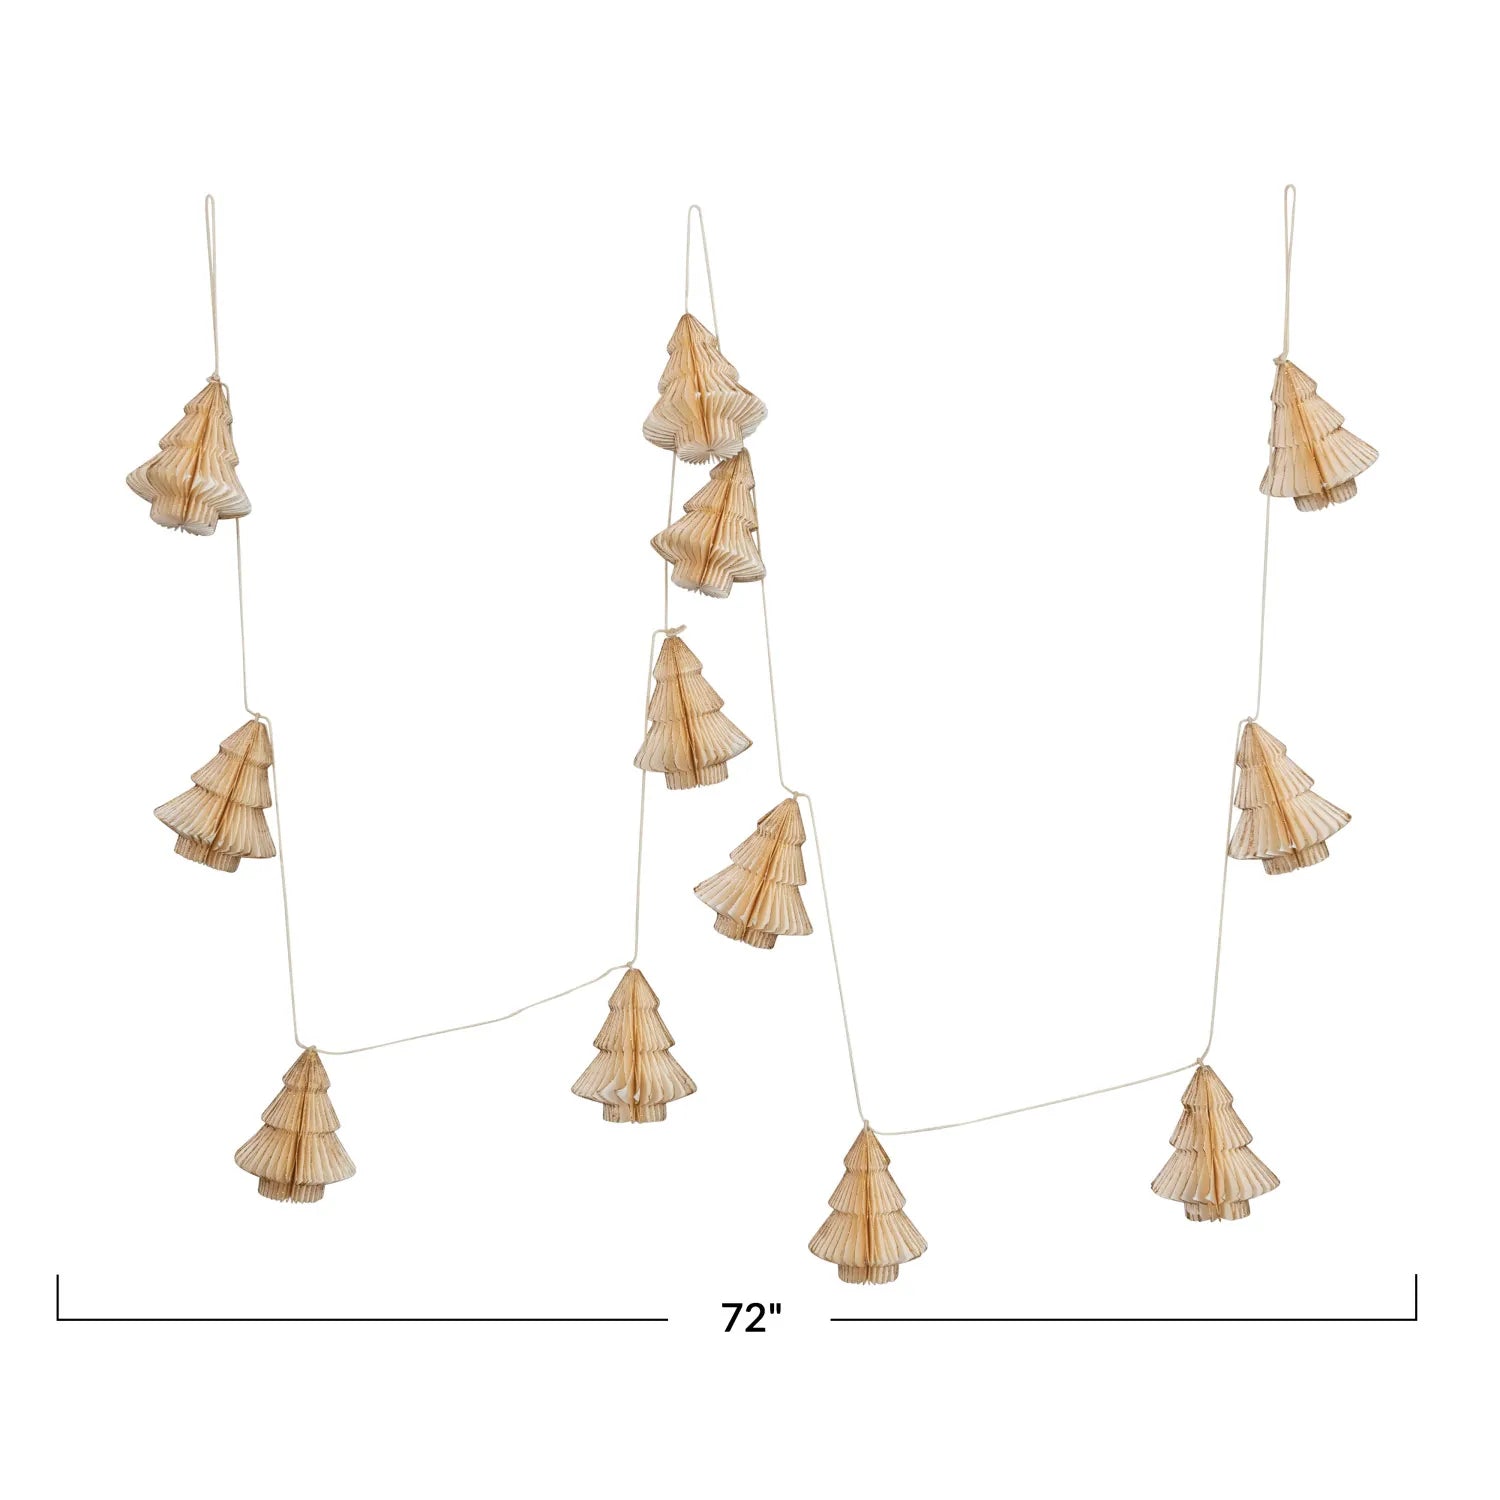 72-inch long garland made of paper trees in off-white and gold.